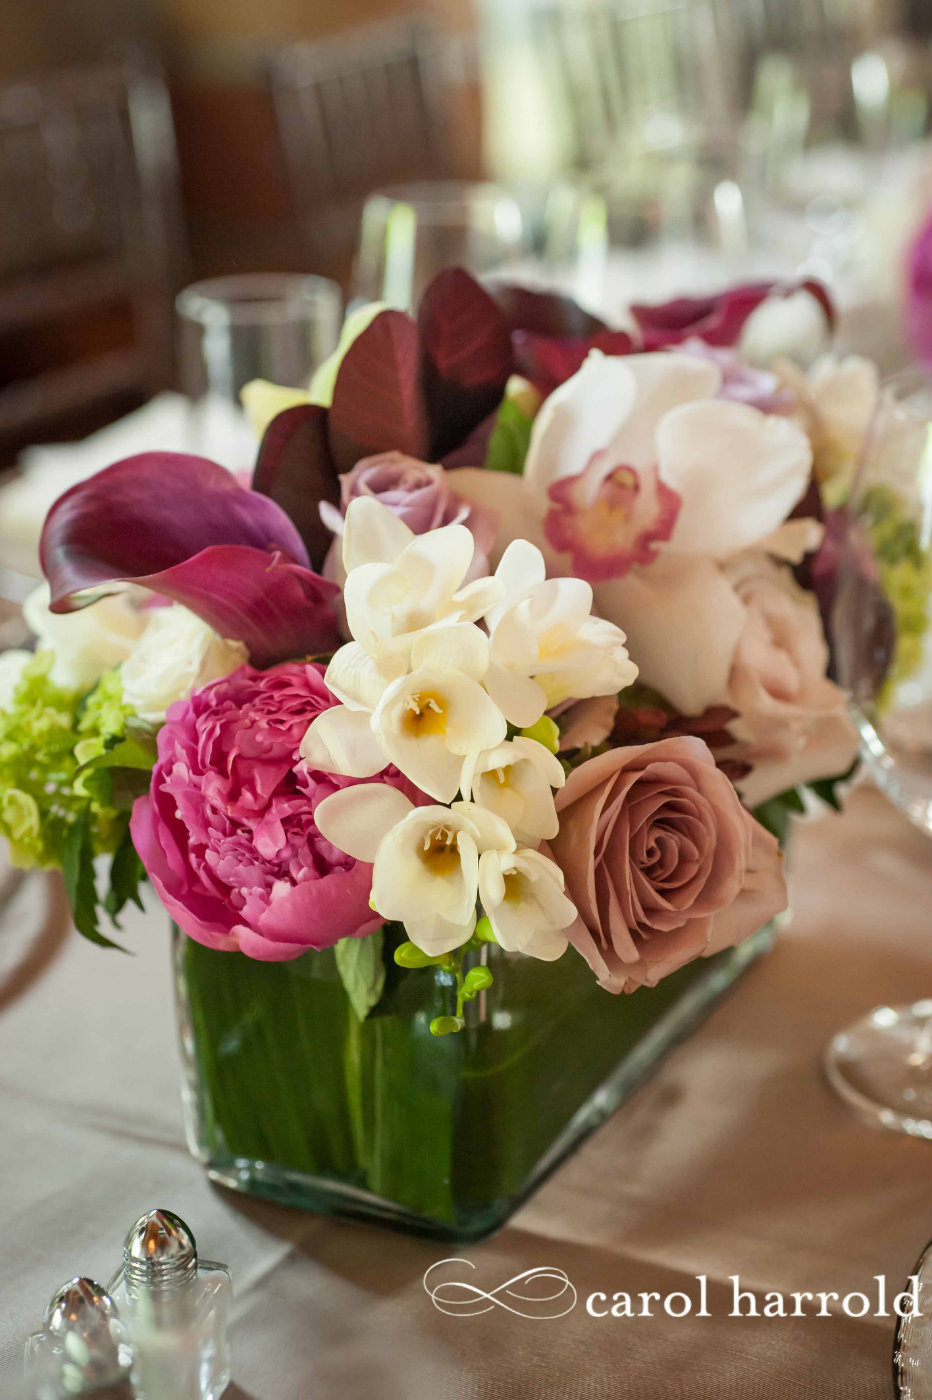 modern centerpiece of white freesia, pink peonies, purple calla lilies, mauve roses, white orchids, in leaf lines square glass vase